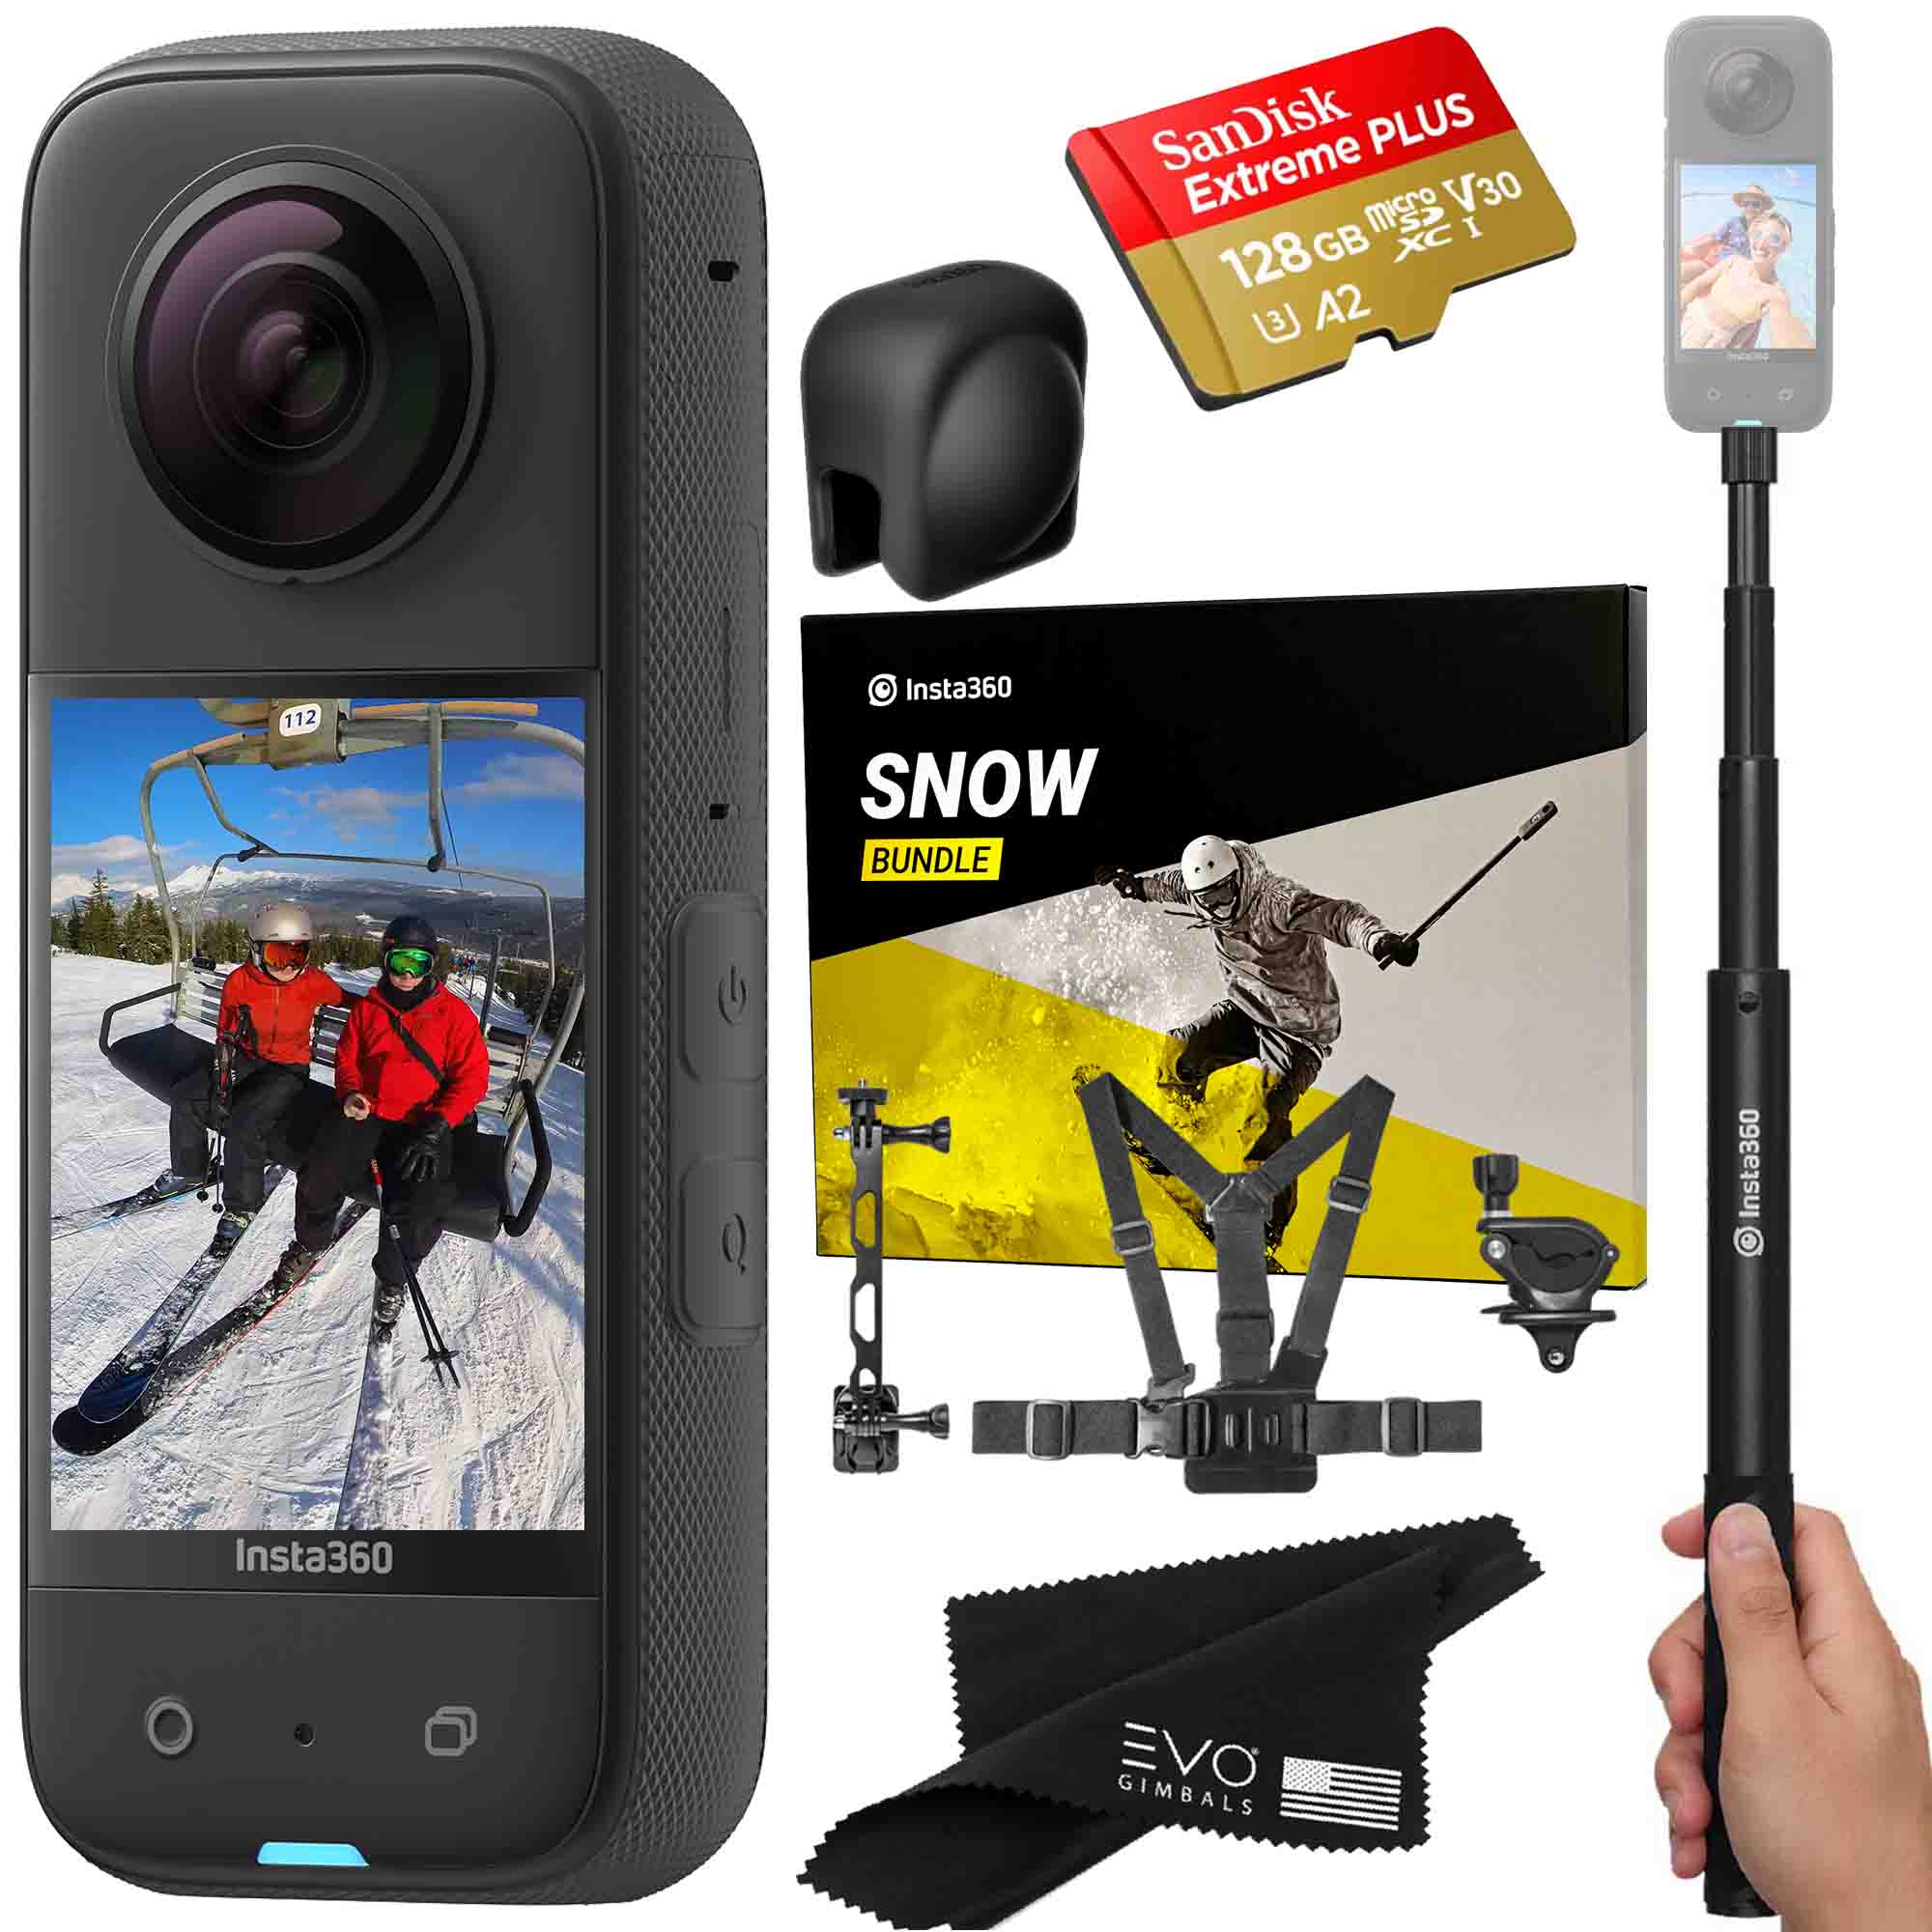 Insta360 One RS - Twin Edition 360° & 4K + Selfie Stick PACK